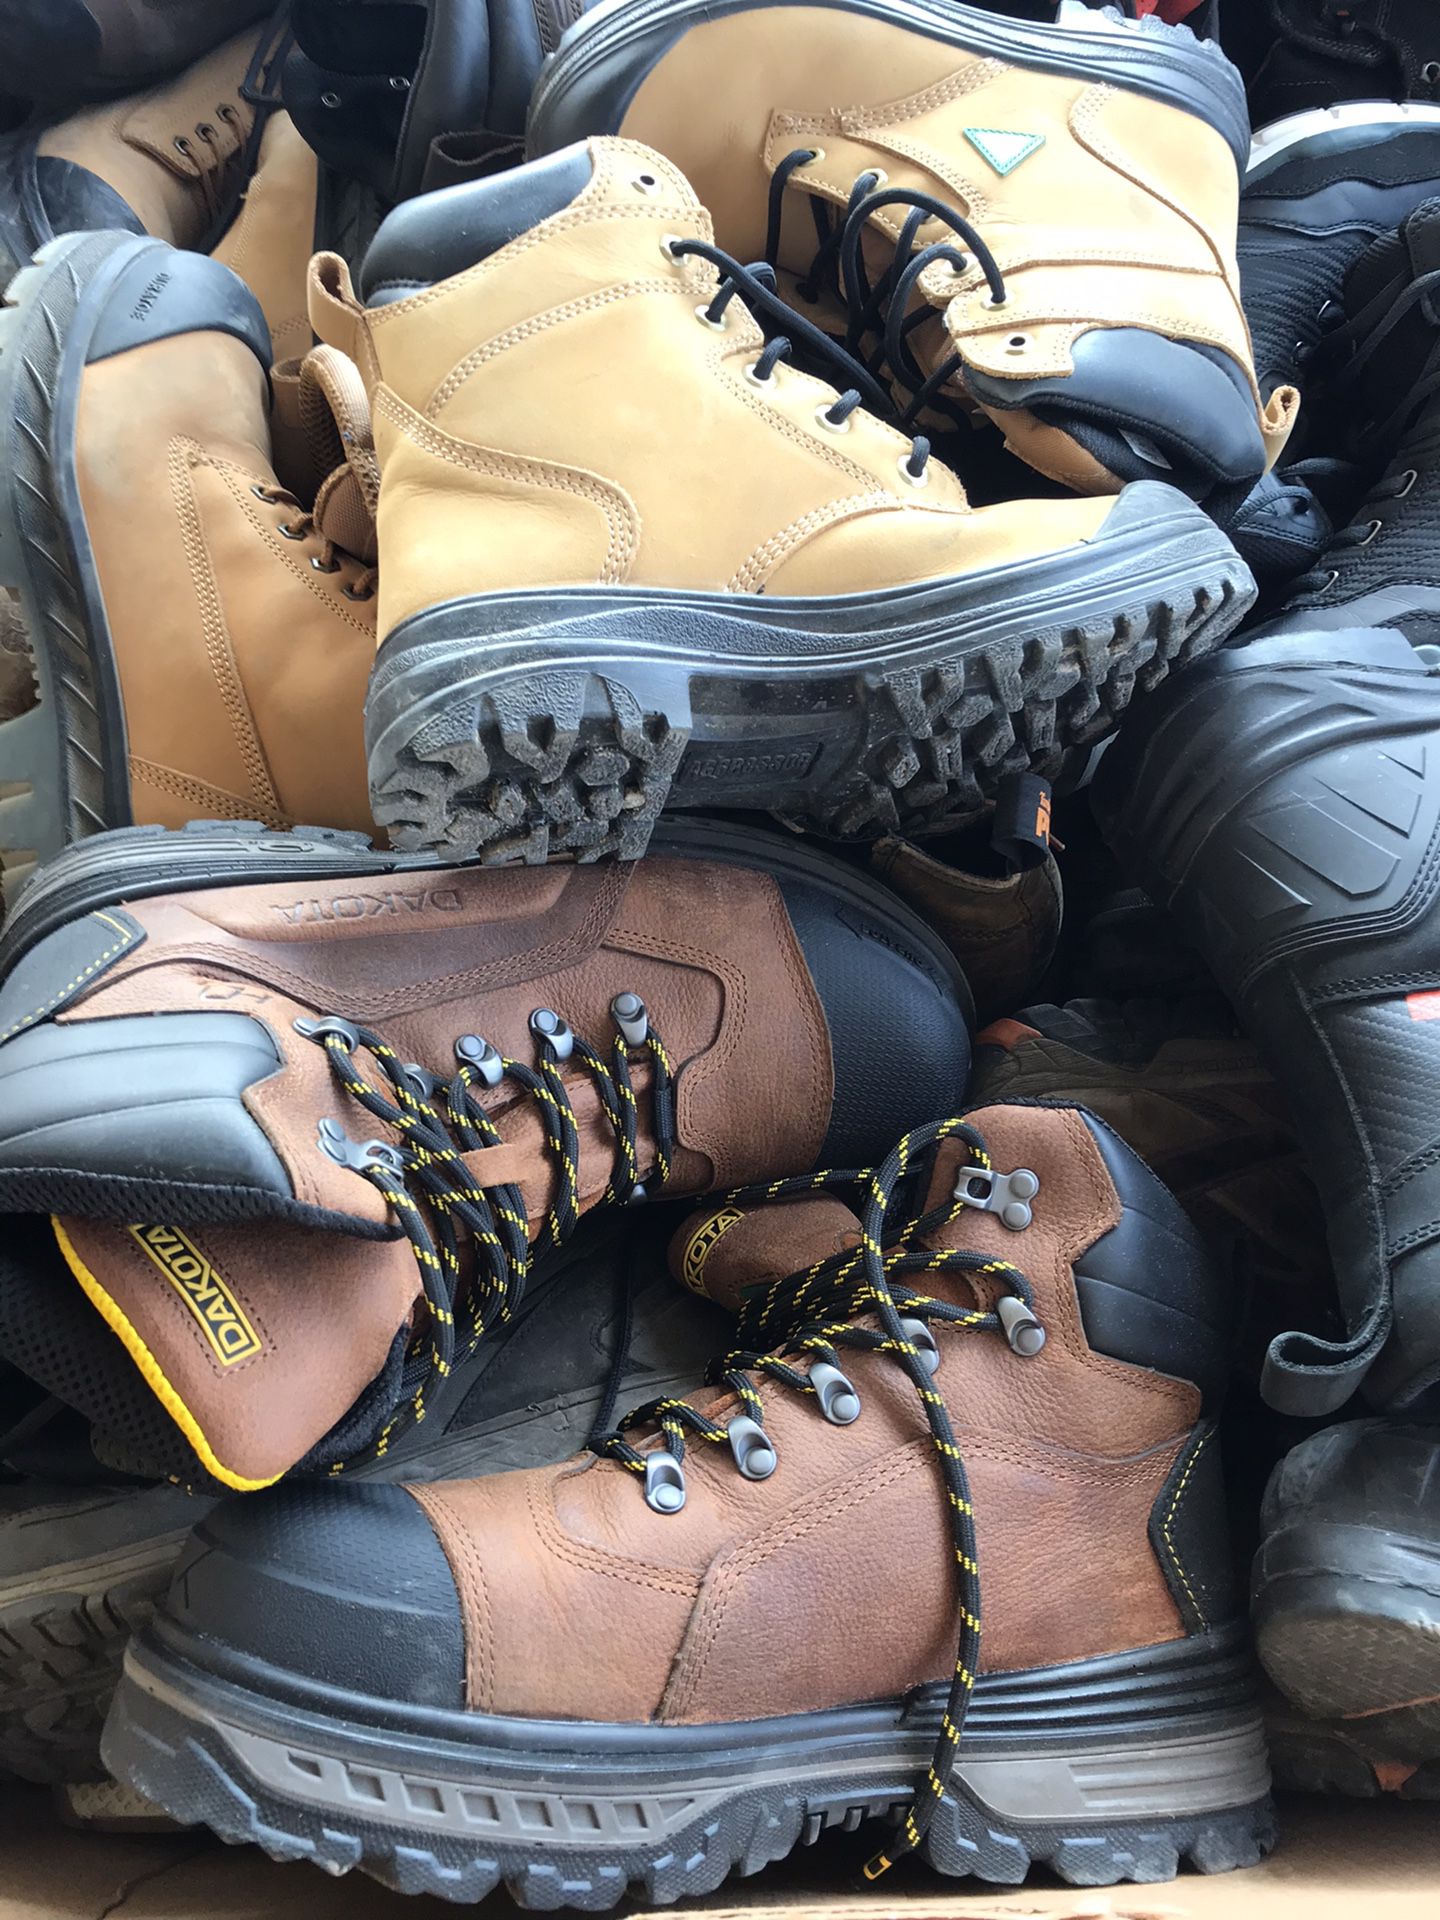 Work boots (Used And new) Wholesale